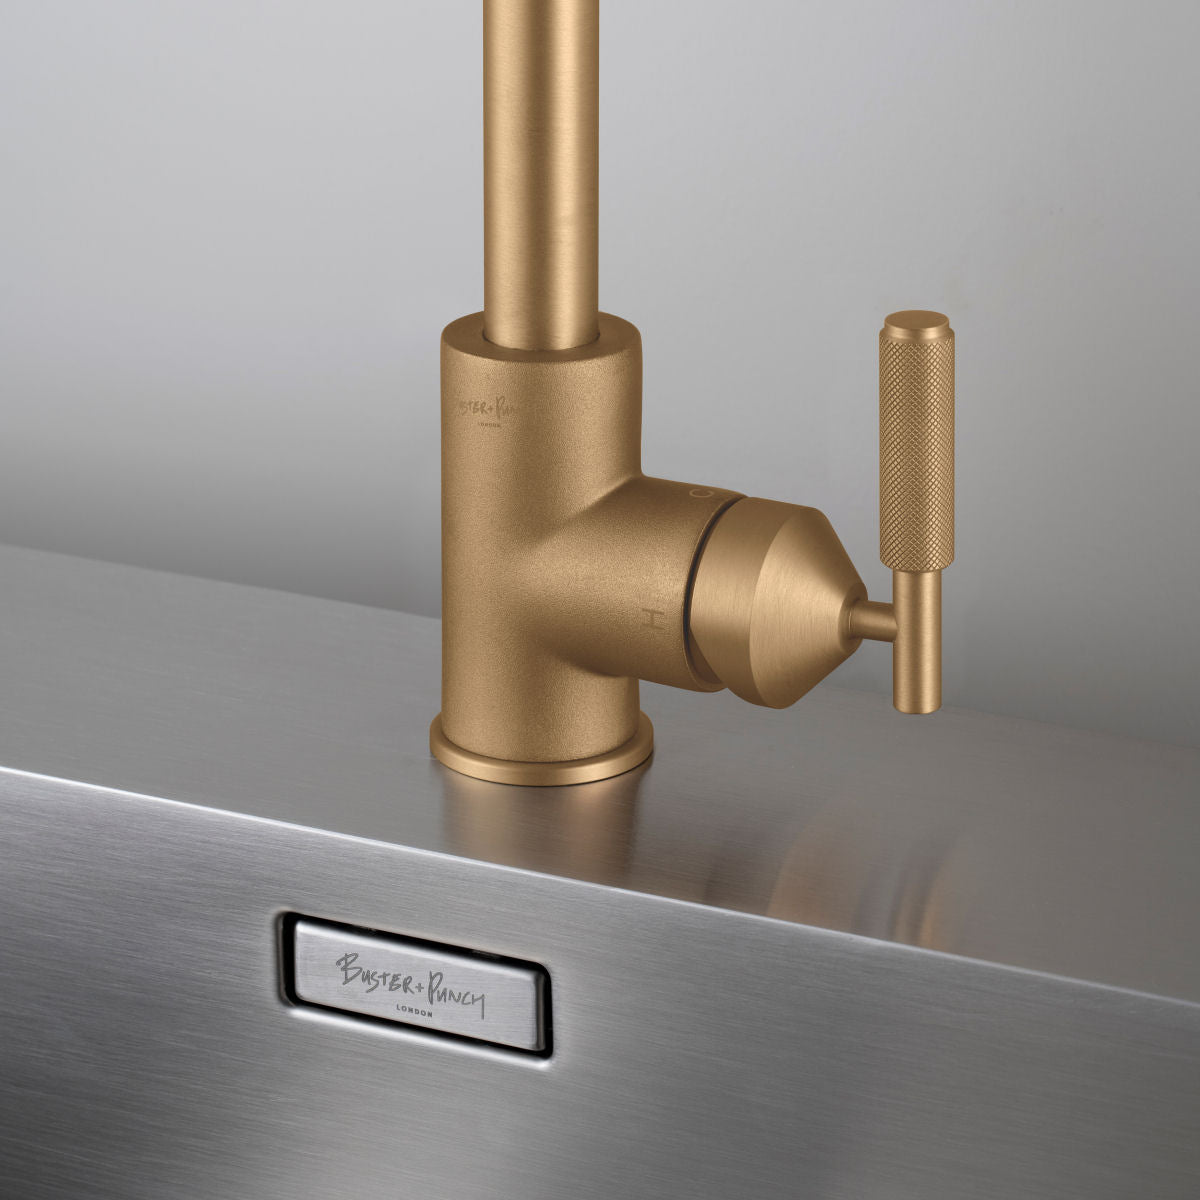 Luxury Buster and Punch Pull Out Kitchen Faucet BRASS - |VESIMI Design| Luxury and Rustic bathrooms online